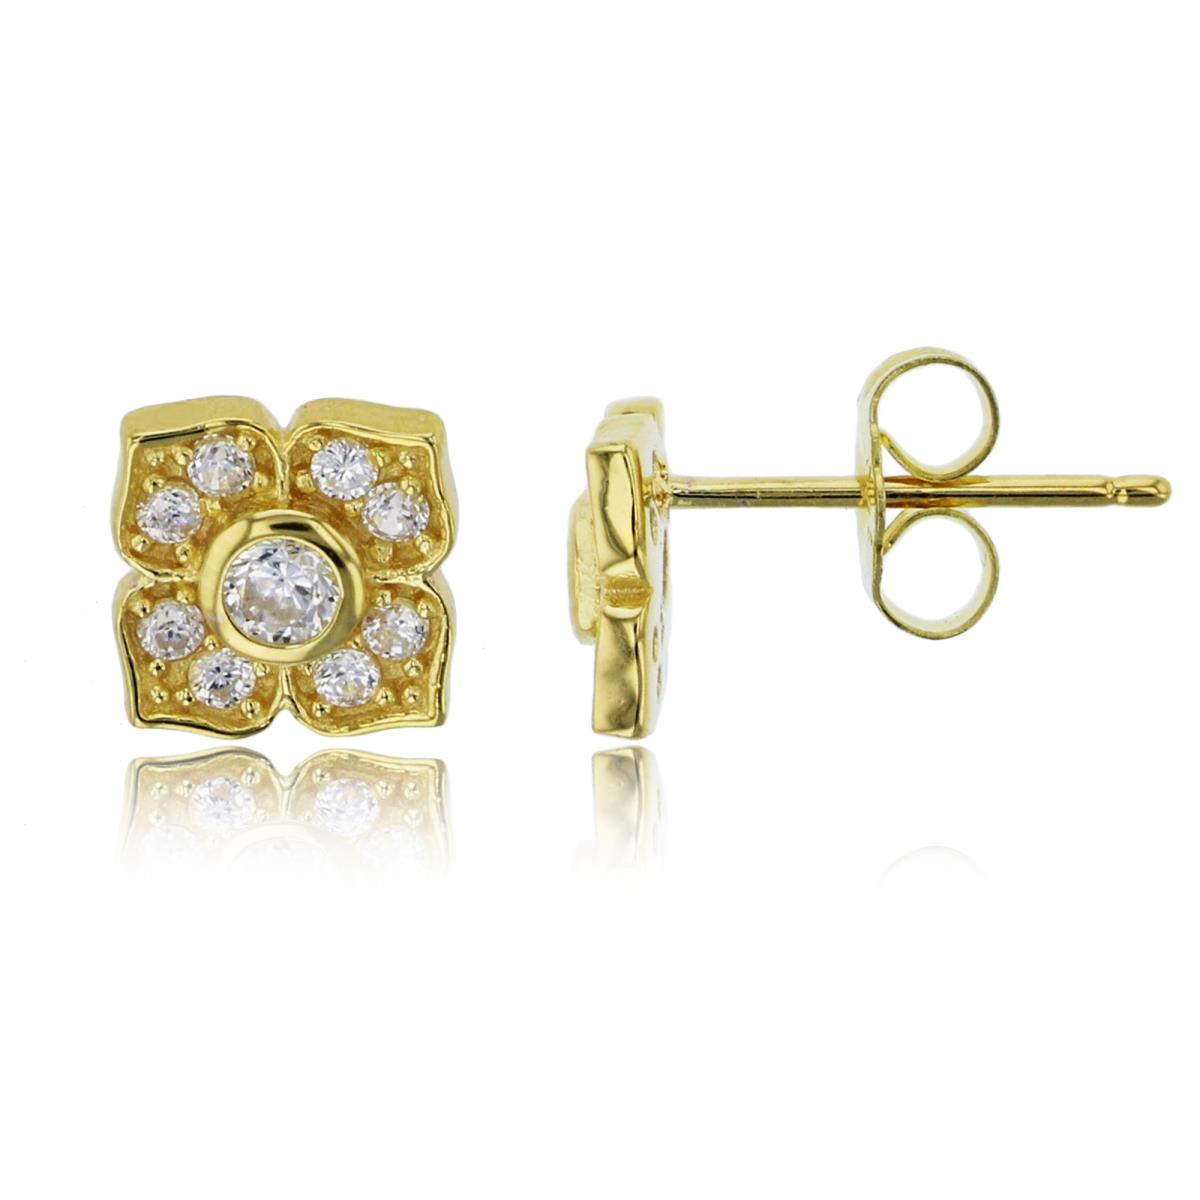 Sterling Silver Yellow 8x8mm Micropave Flower Stud Earring